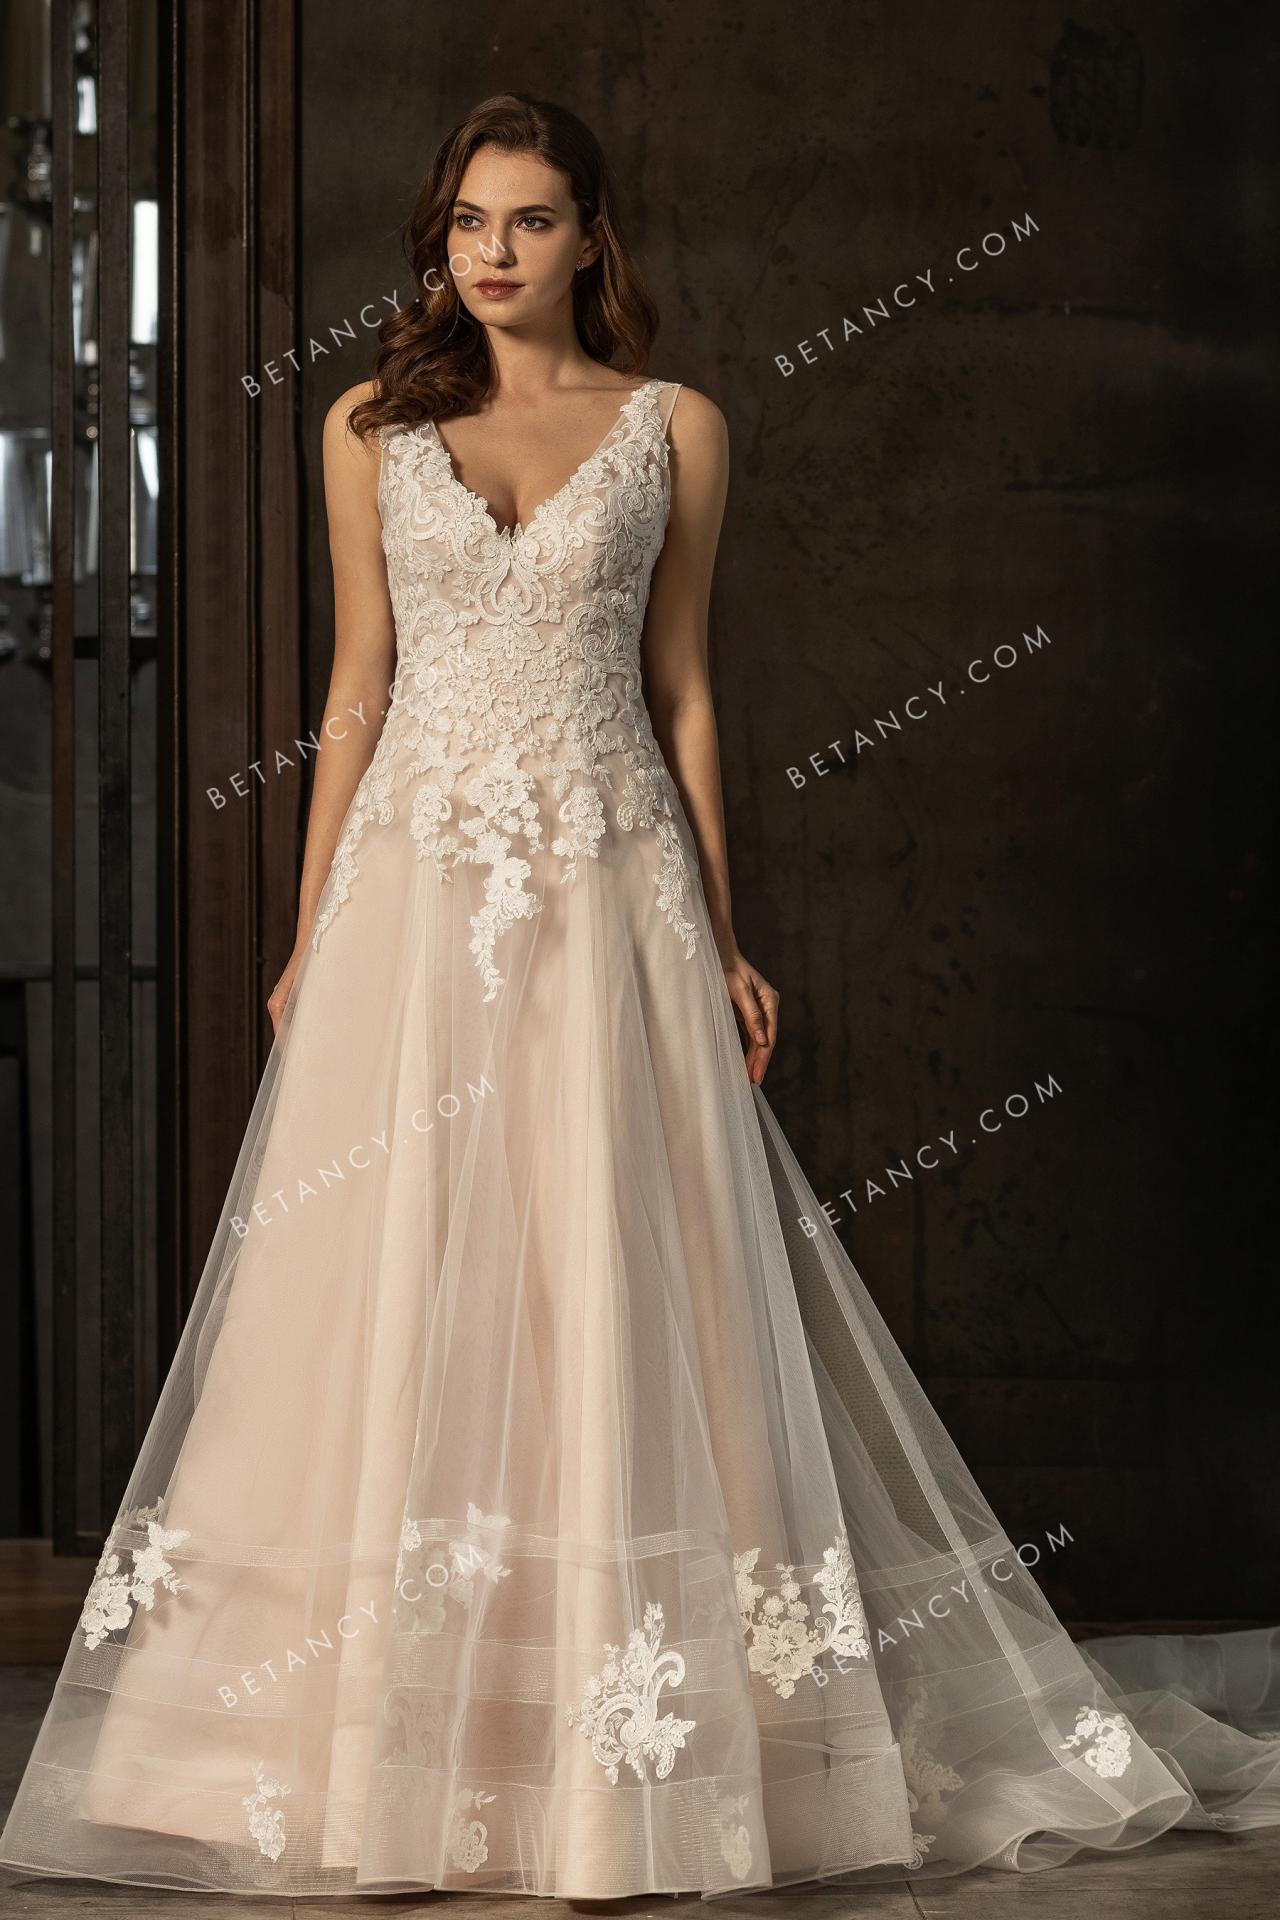 Elaborate embroidered lace pink nude wedding dress 1